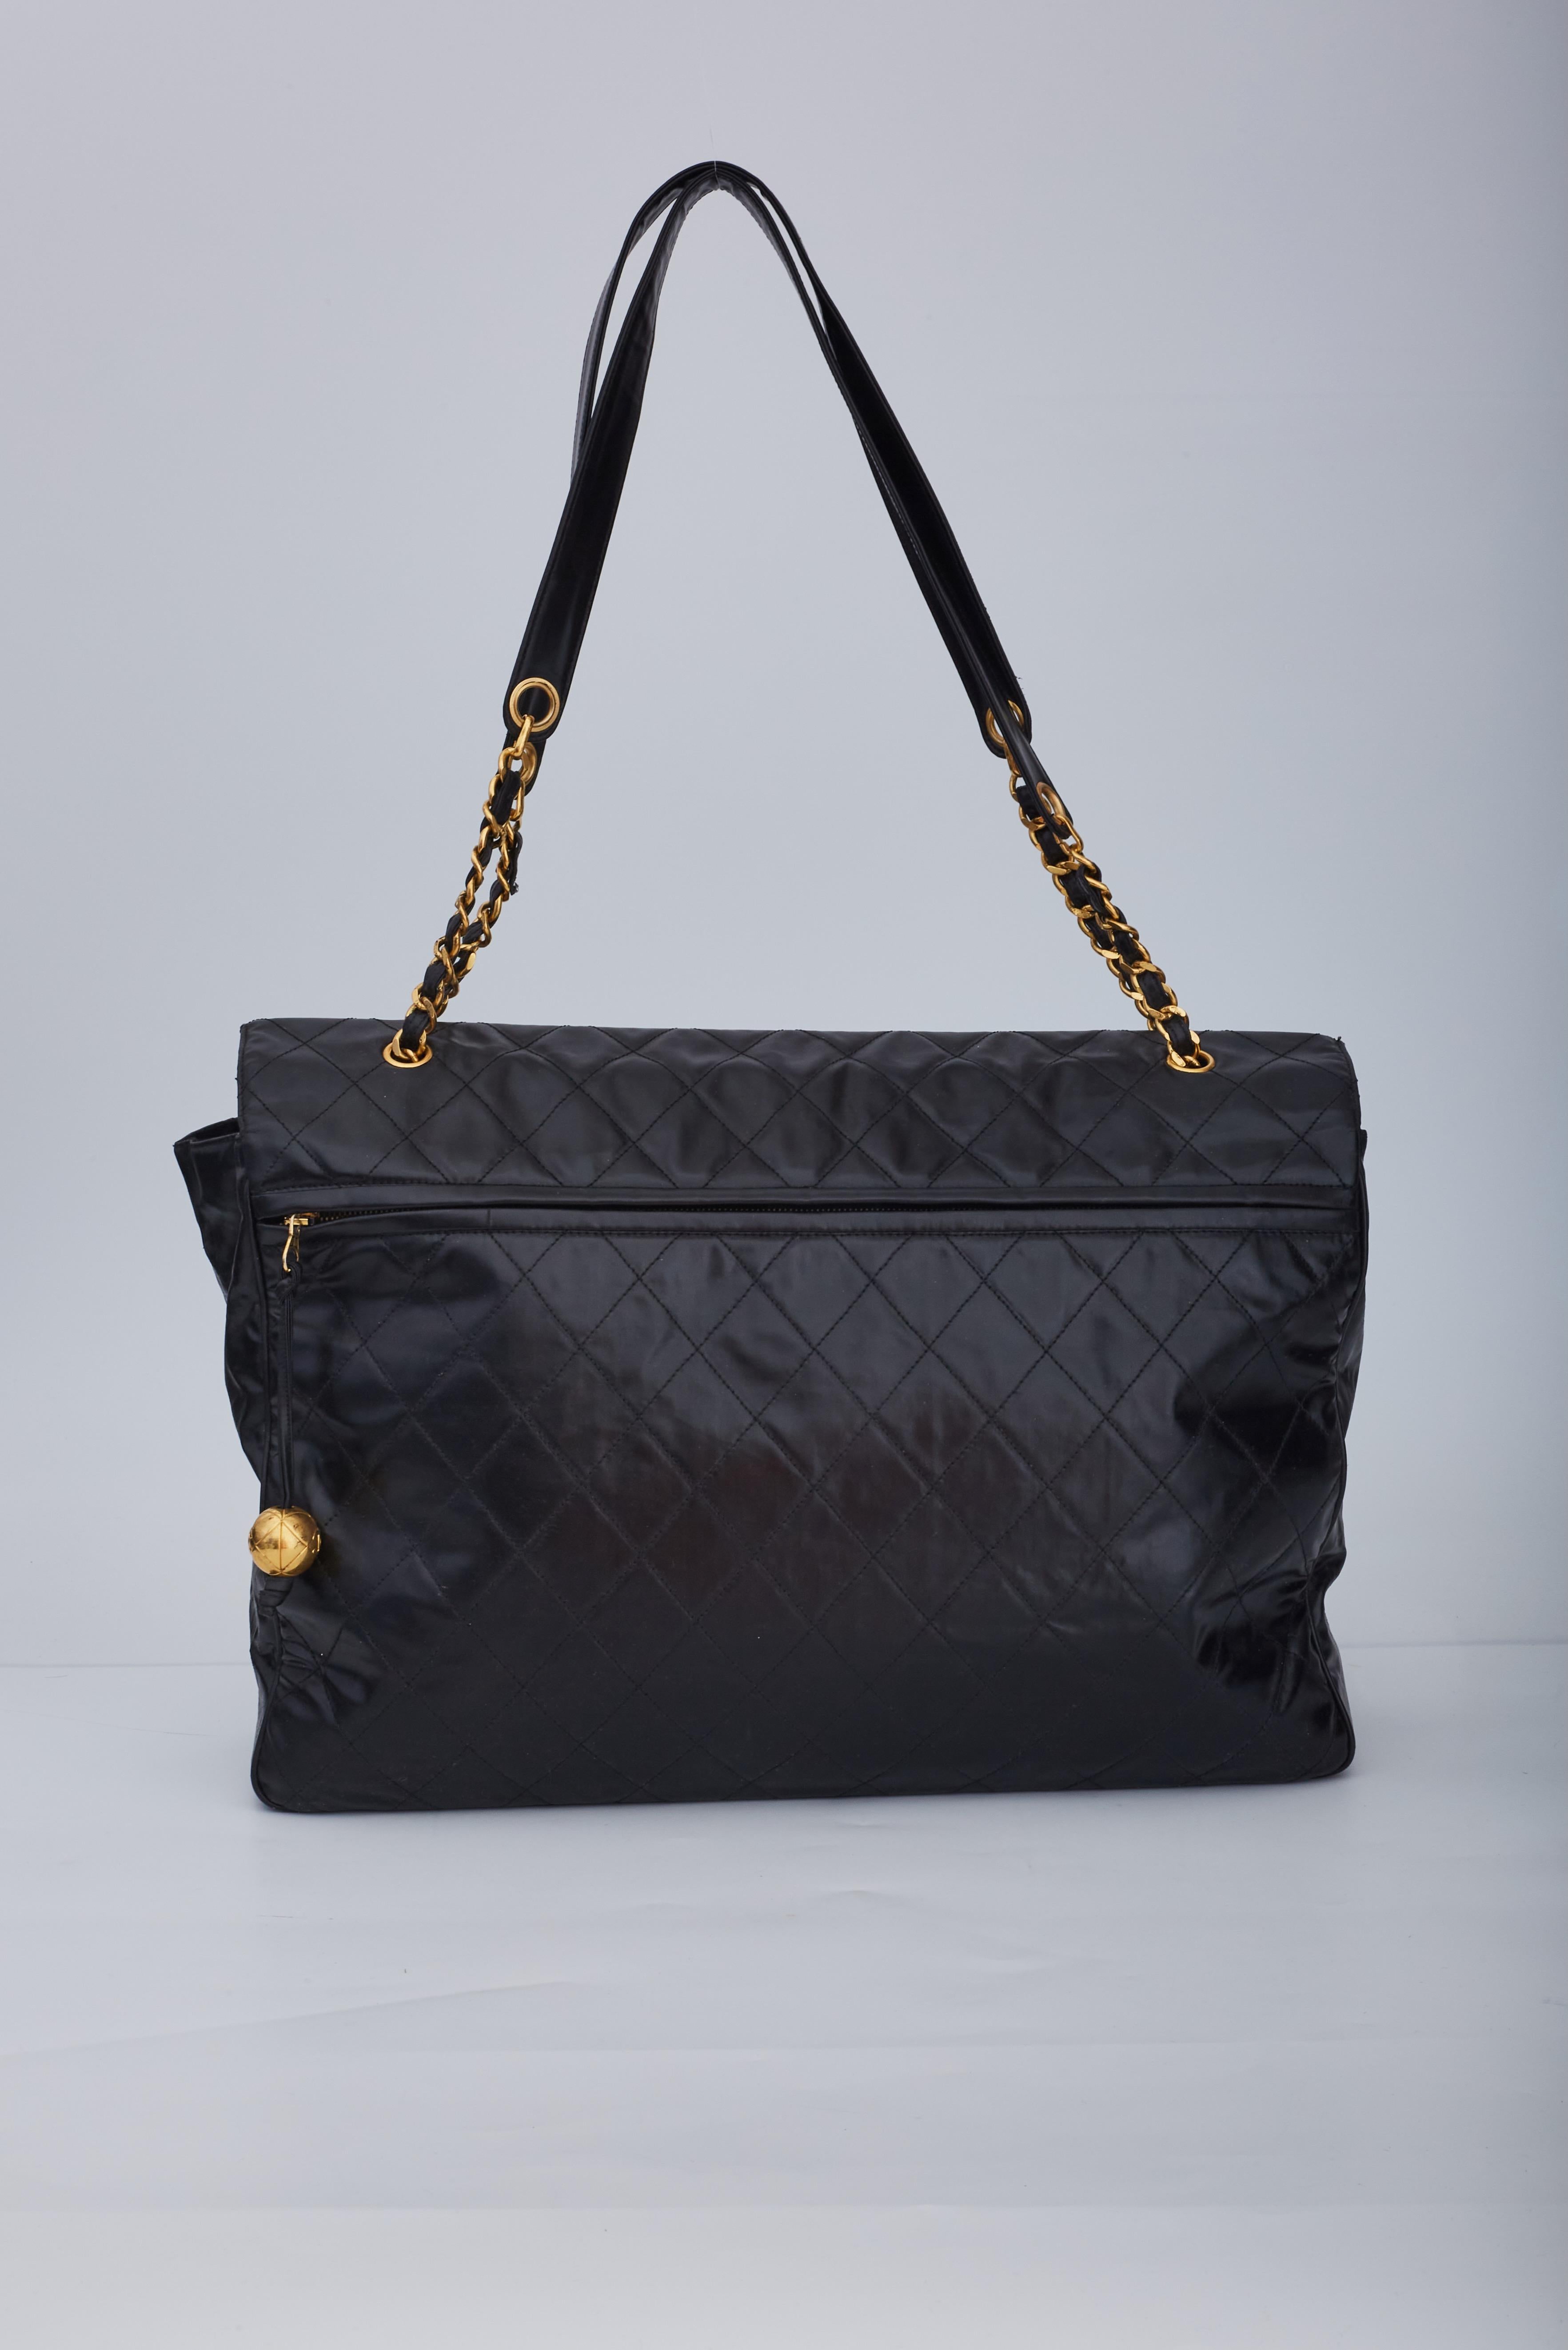 Chanel XXL flap bag of leather with large flap closer with turn lock closure. Chanel bags with the serial number 3XXXXXX are manufactured from 1994 to 1996.

COLOR: Black
MATERIAL: Calfskin leather
ITEM CODE: 3665983
COMES WITH: Authenticity